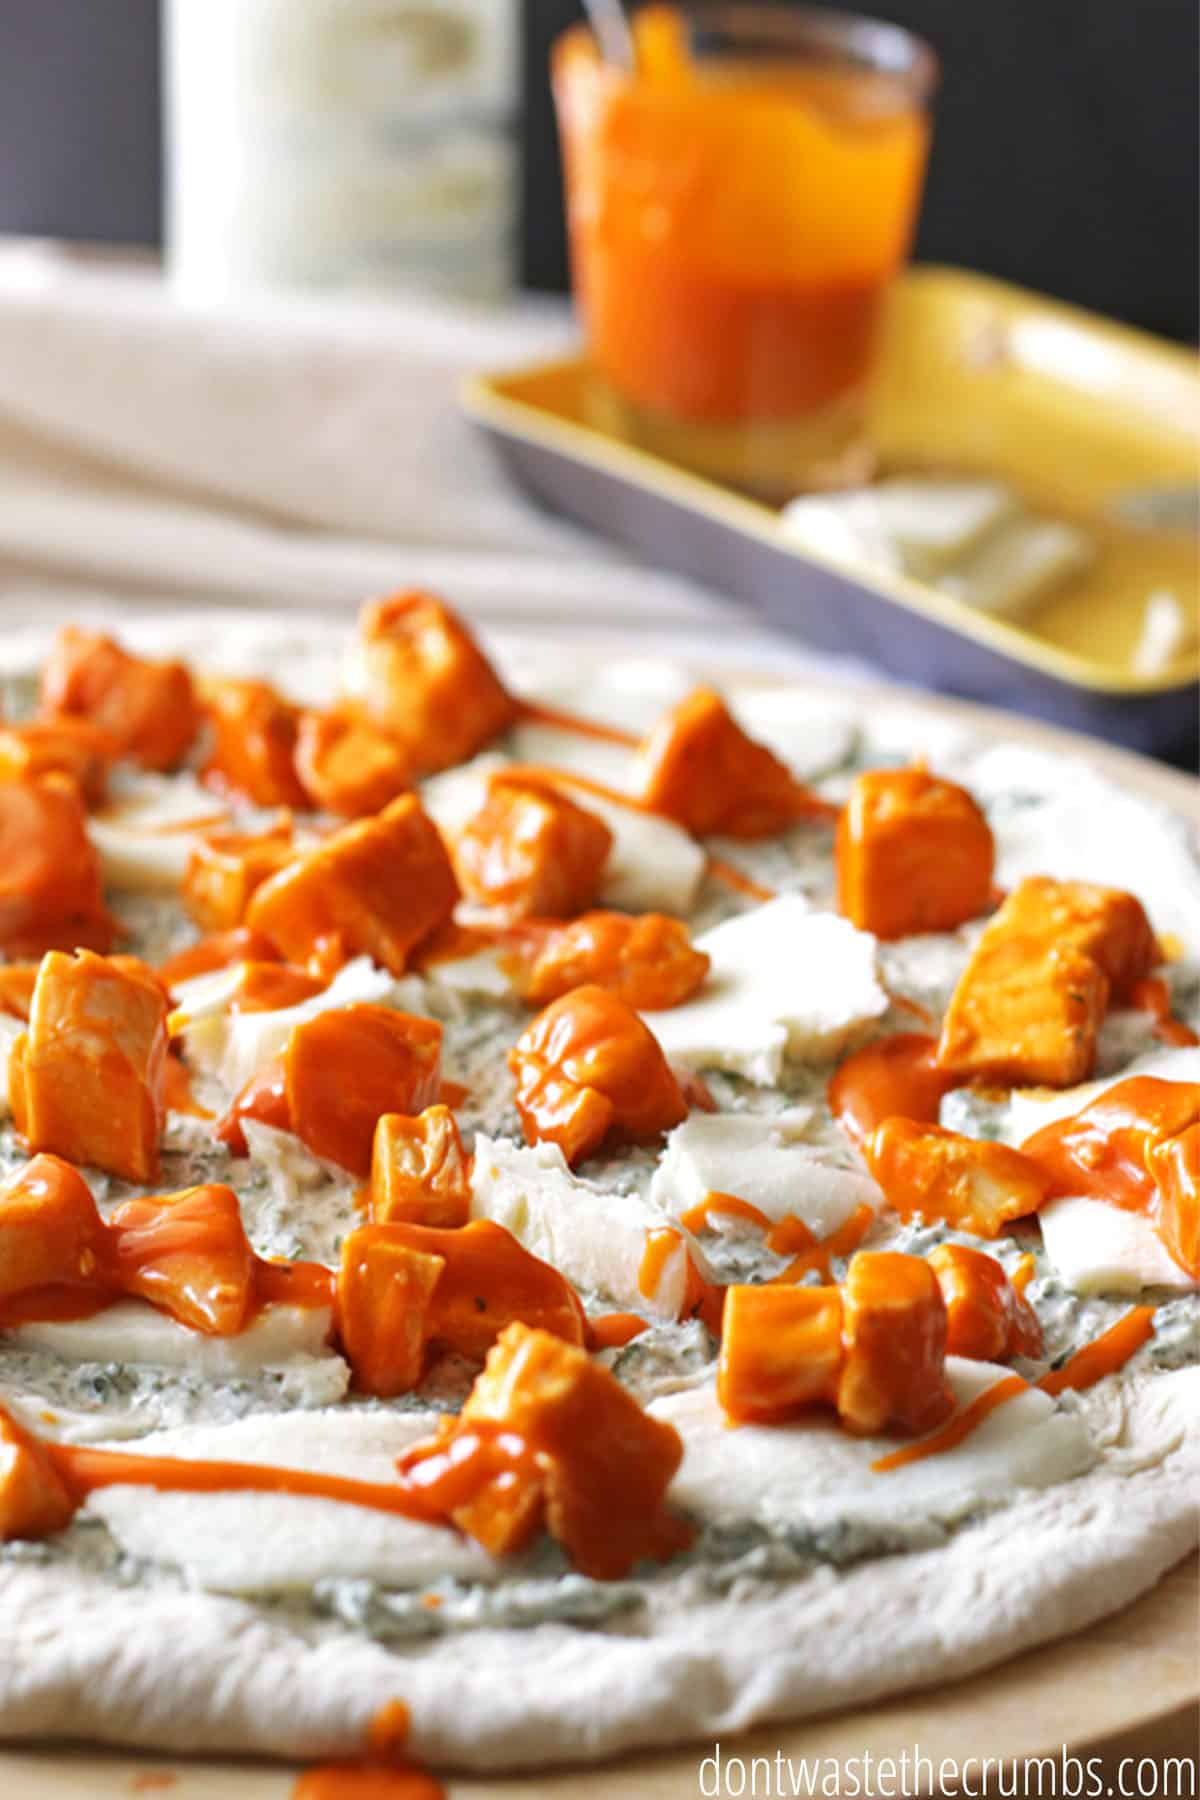 Freshly rolled pizza dough with mozzarella cheese, blue cheese dressing, cubed chicken slathered in buffalo sauce. Ready to be baked in the oven!